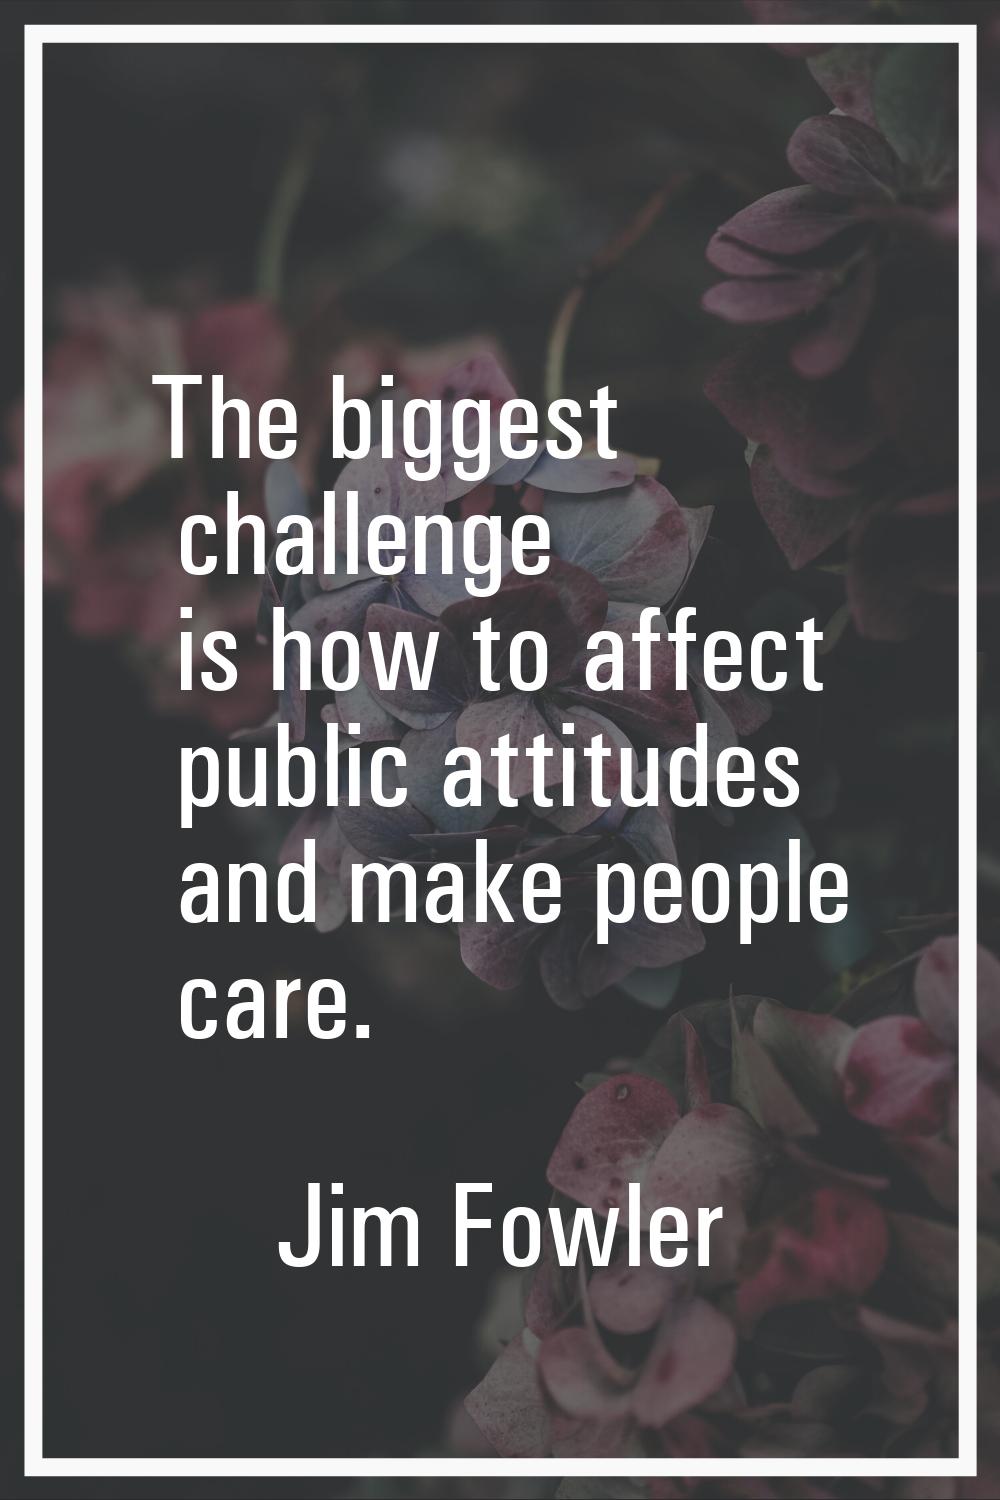 The biggest challenge is how to affect public attitudes and make people care.